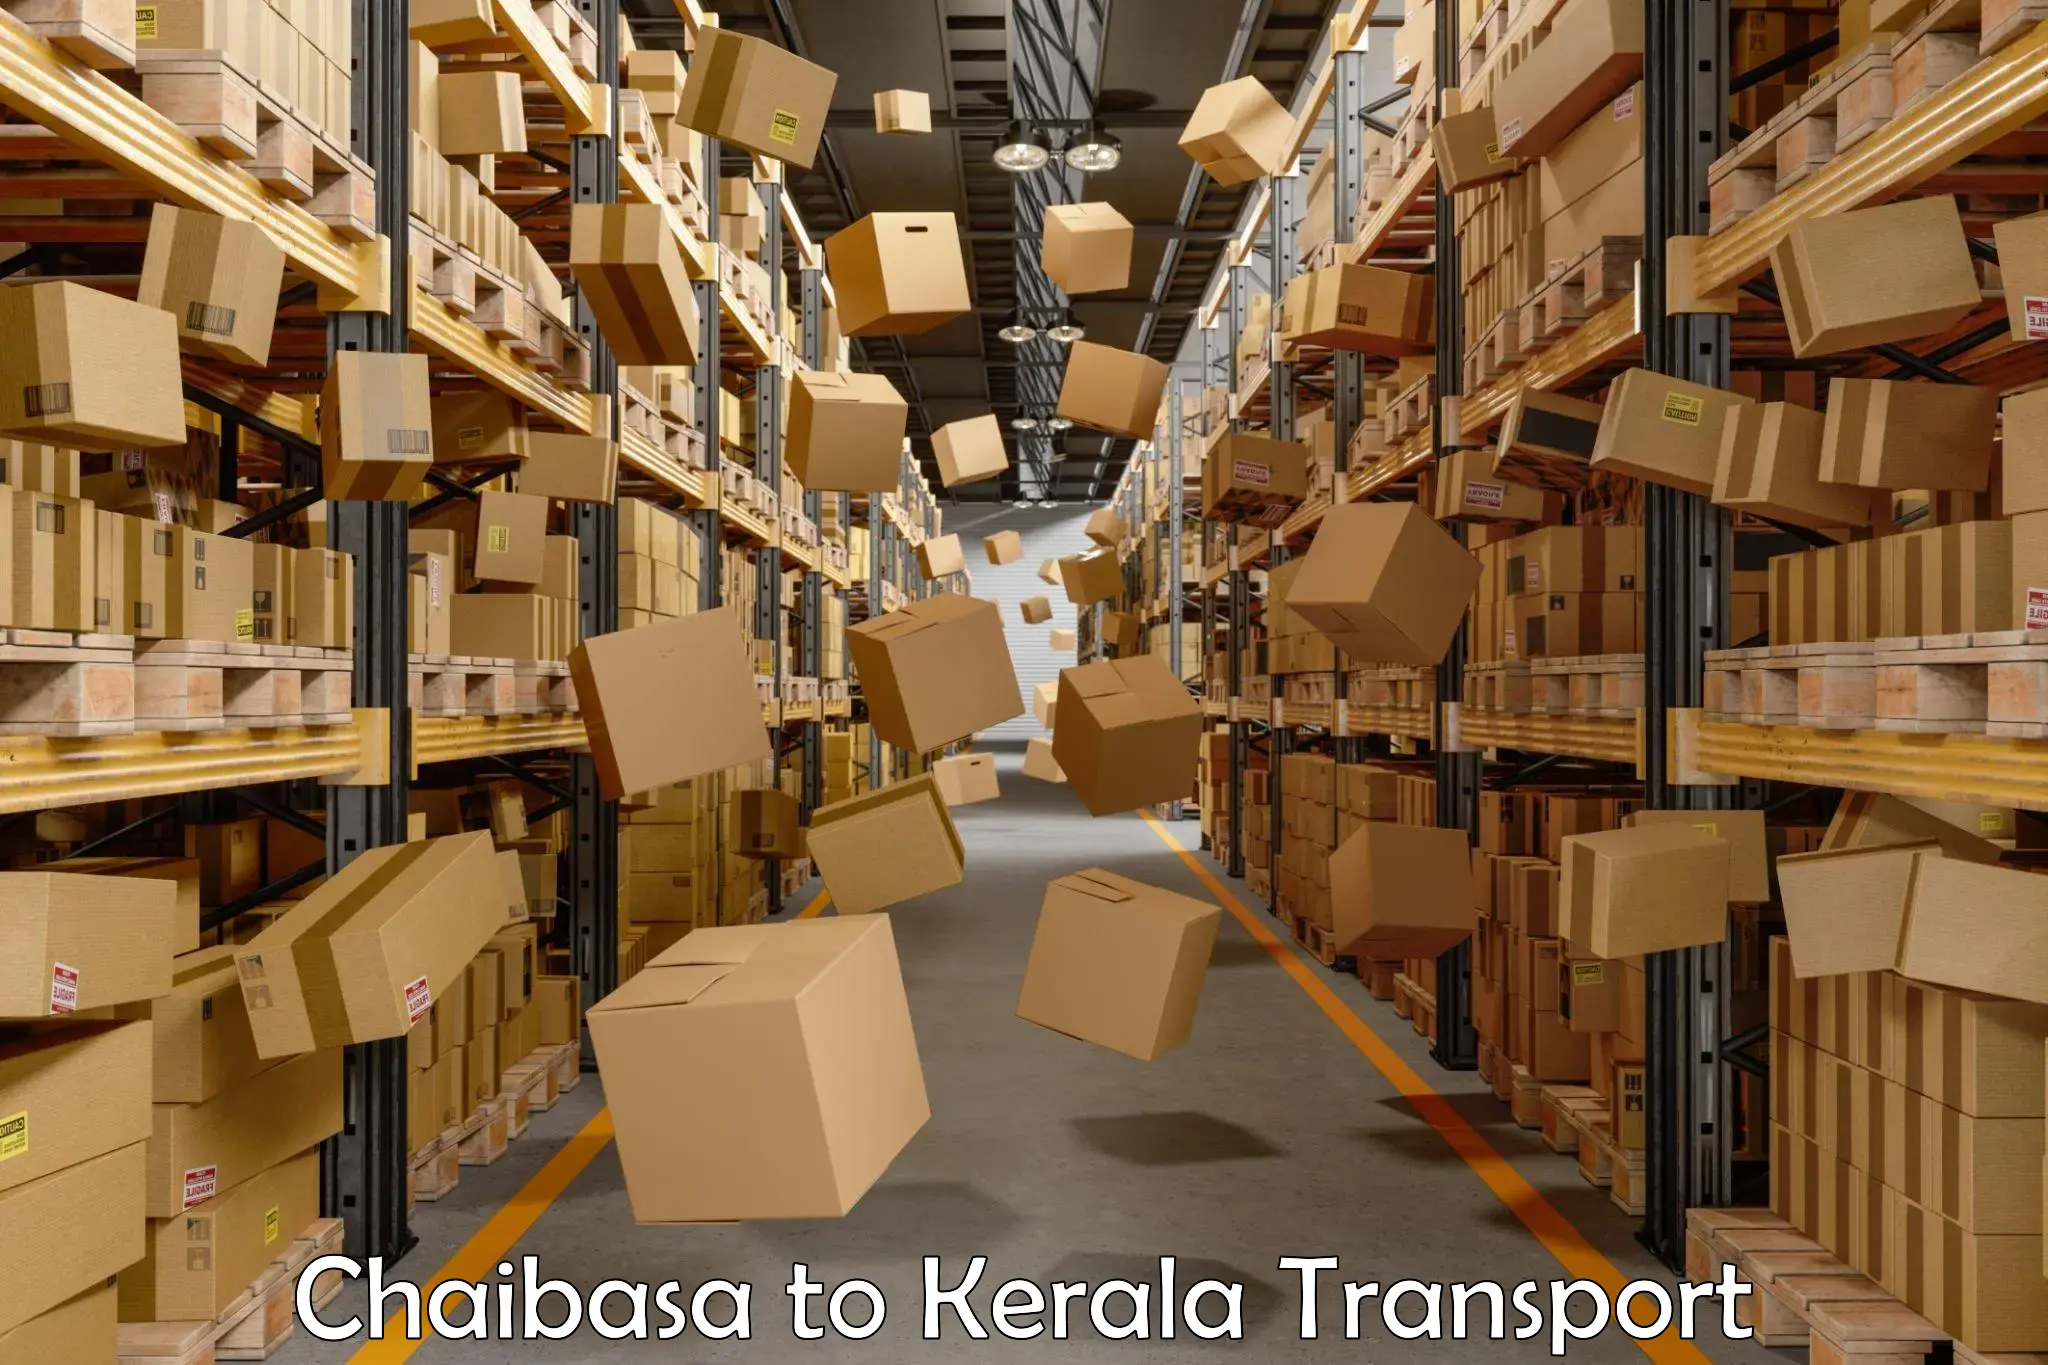 Commercial transport service Chaibasa to Cherthala